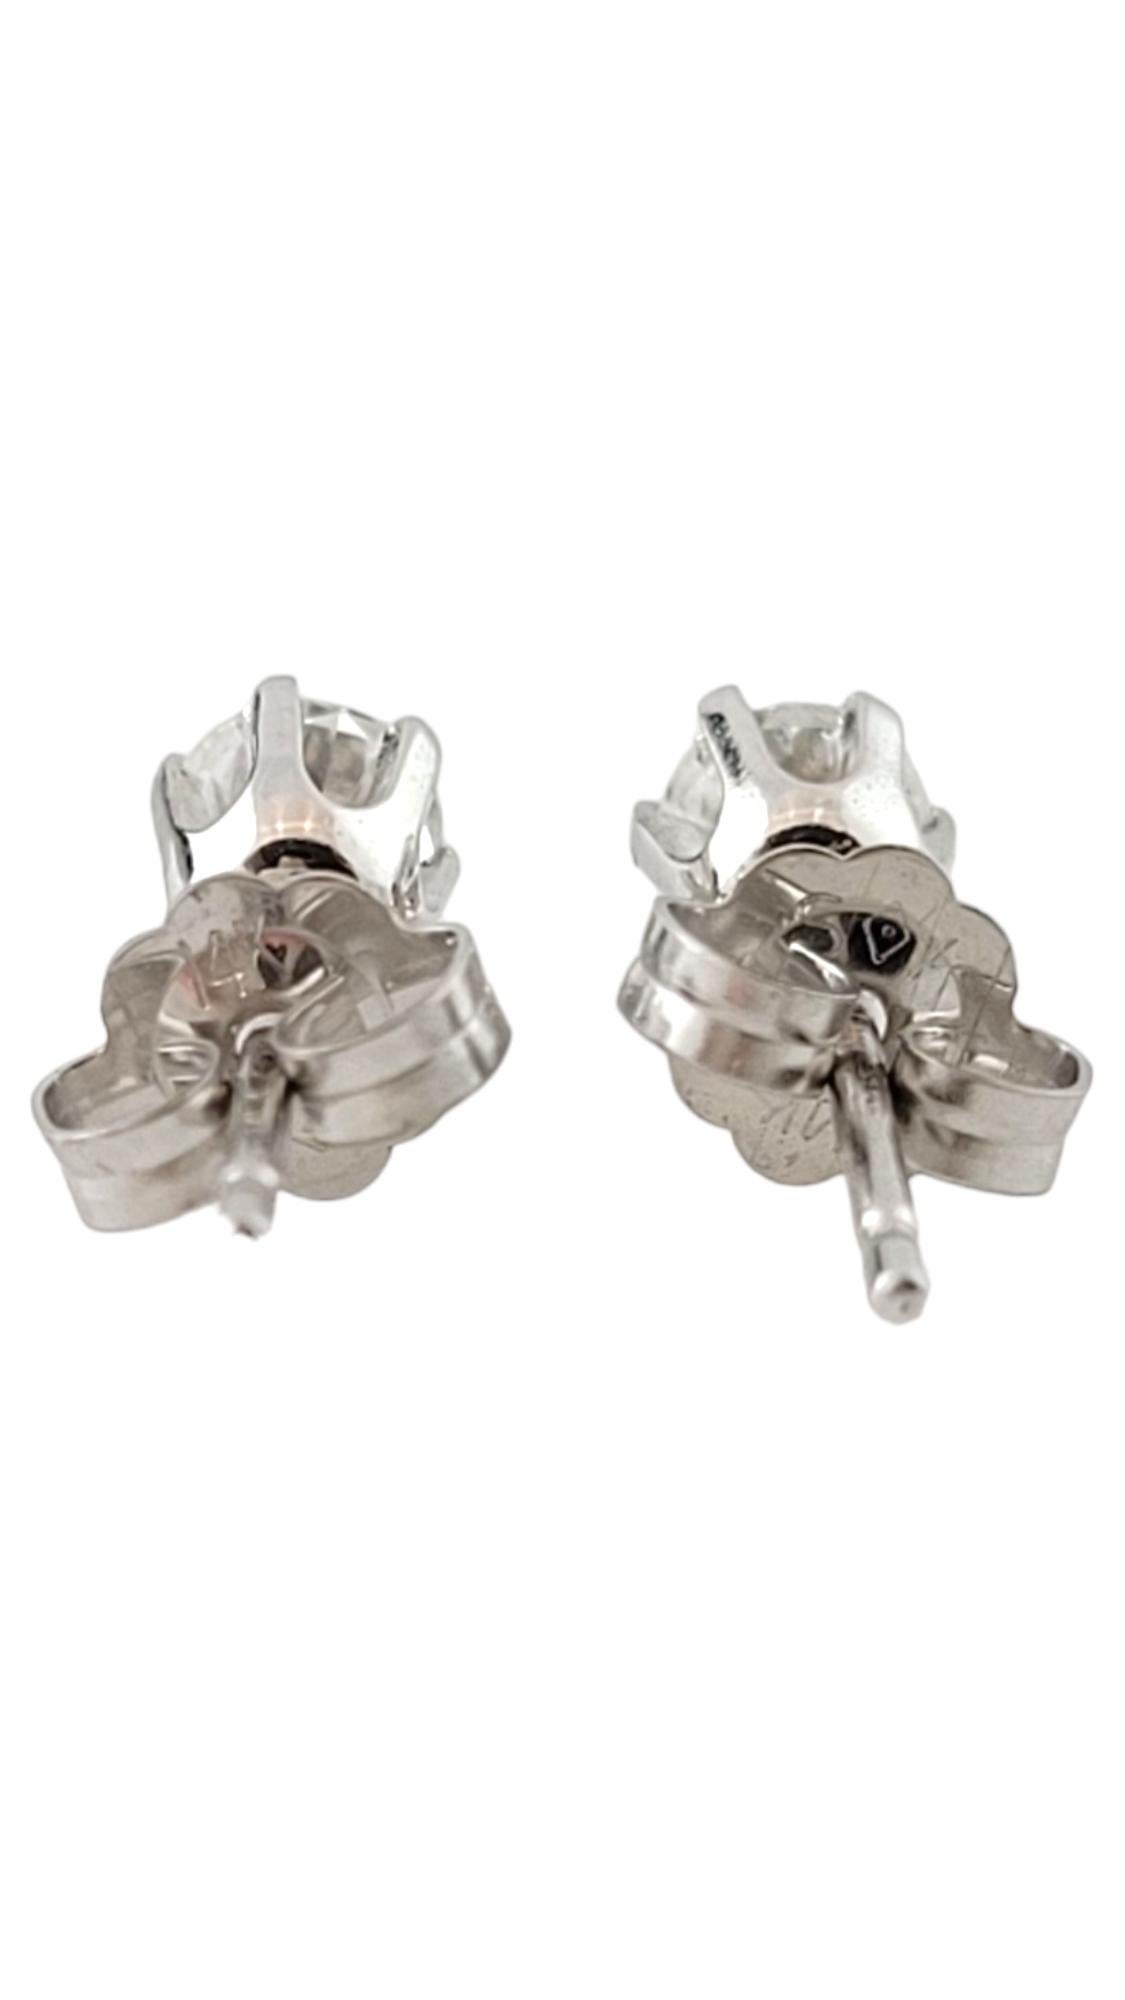 14K White Gold Diamond Stud Earrings #16429 In Good Condition For Sale In Washington Depot, CT